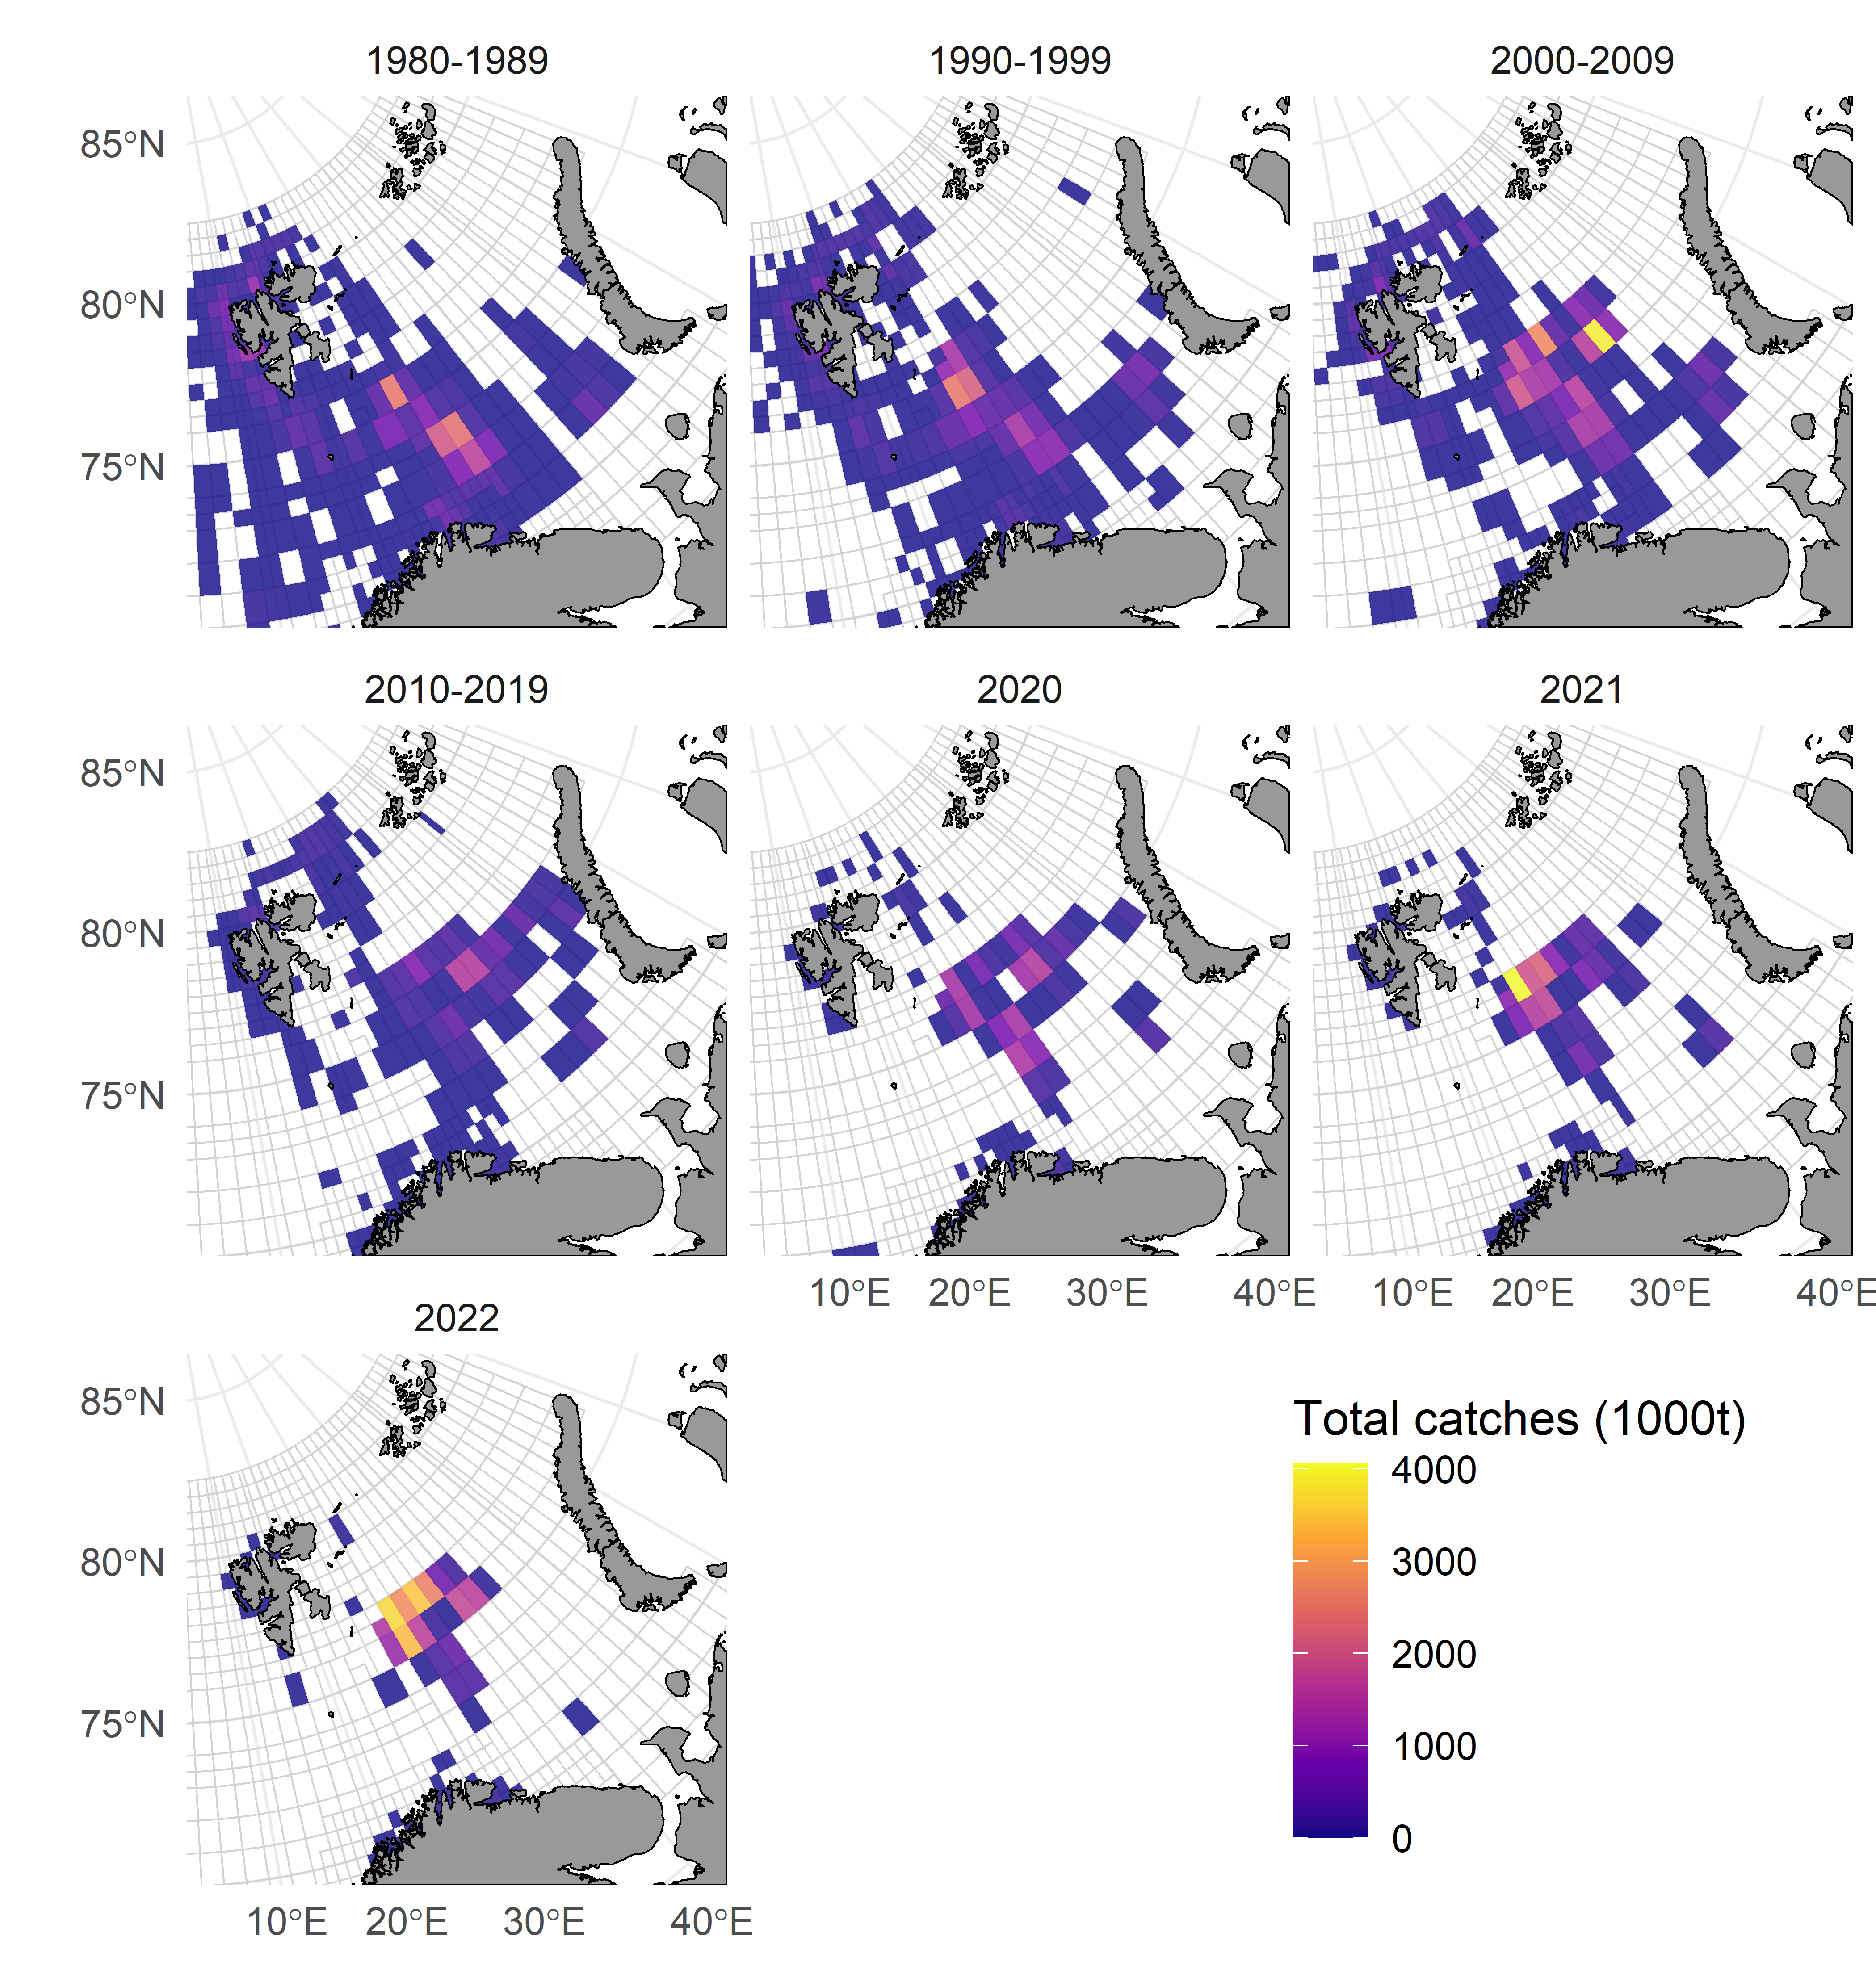 Spatial distribution of catches by year/period